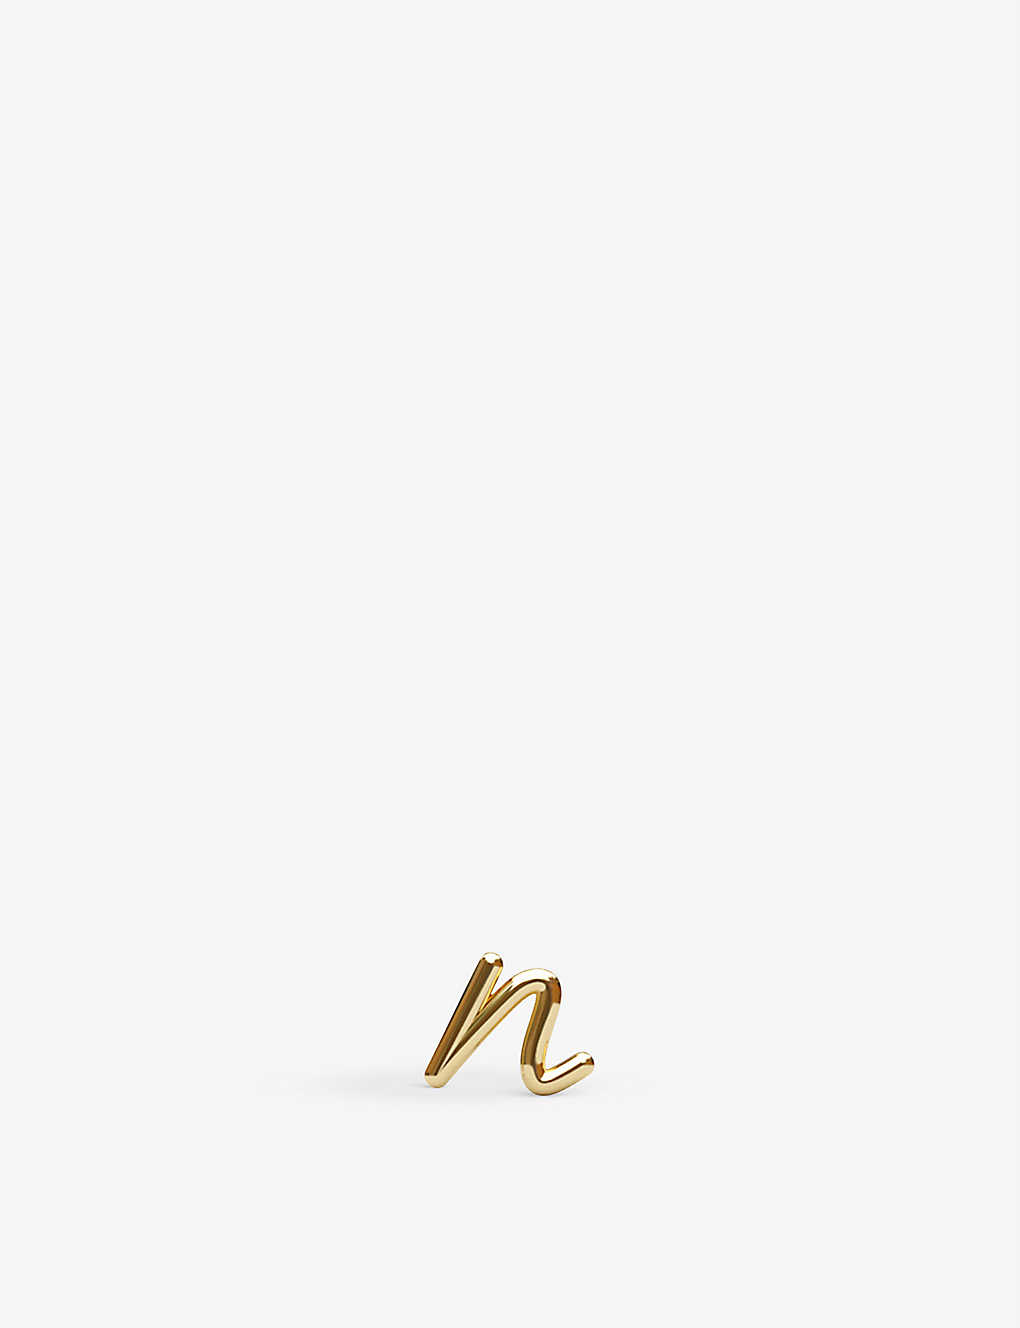 THE ALKEMISTRY THE ALKEMISTRY WOMENS 18CT YELLOW GOLD LOVE LETTER N INITIAL 18CT YELLOW GOLD SINGLE STUD EARRING,51774401